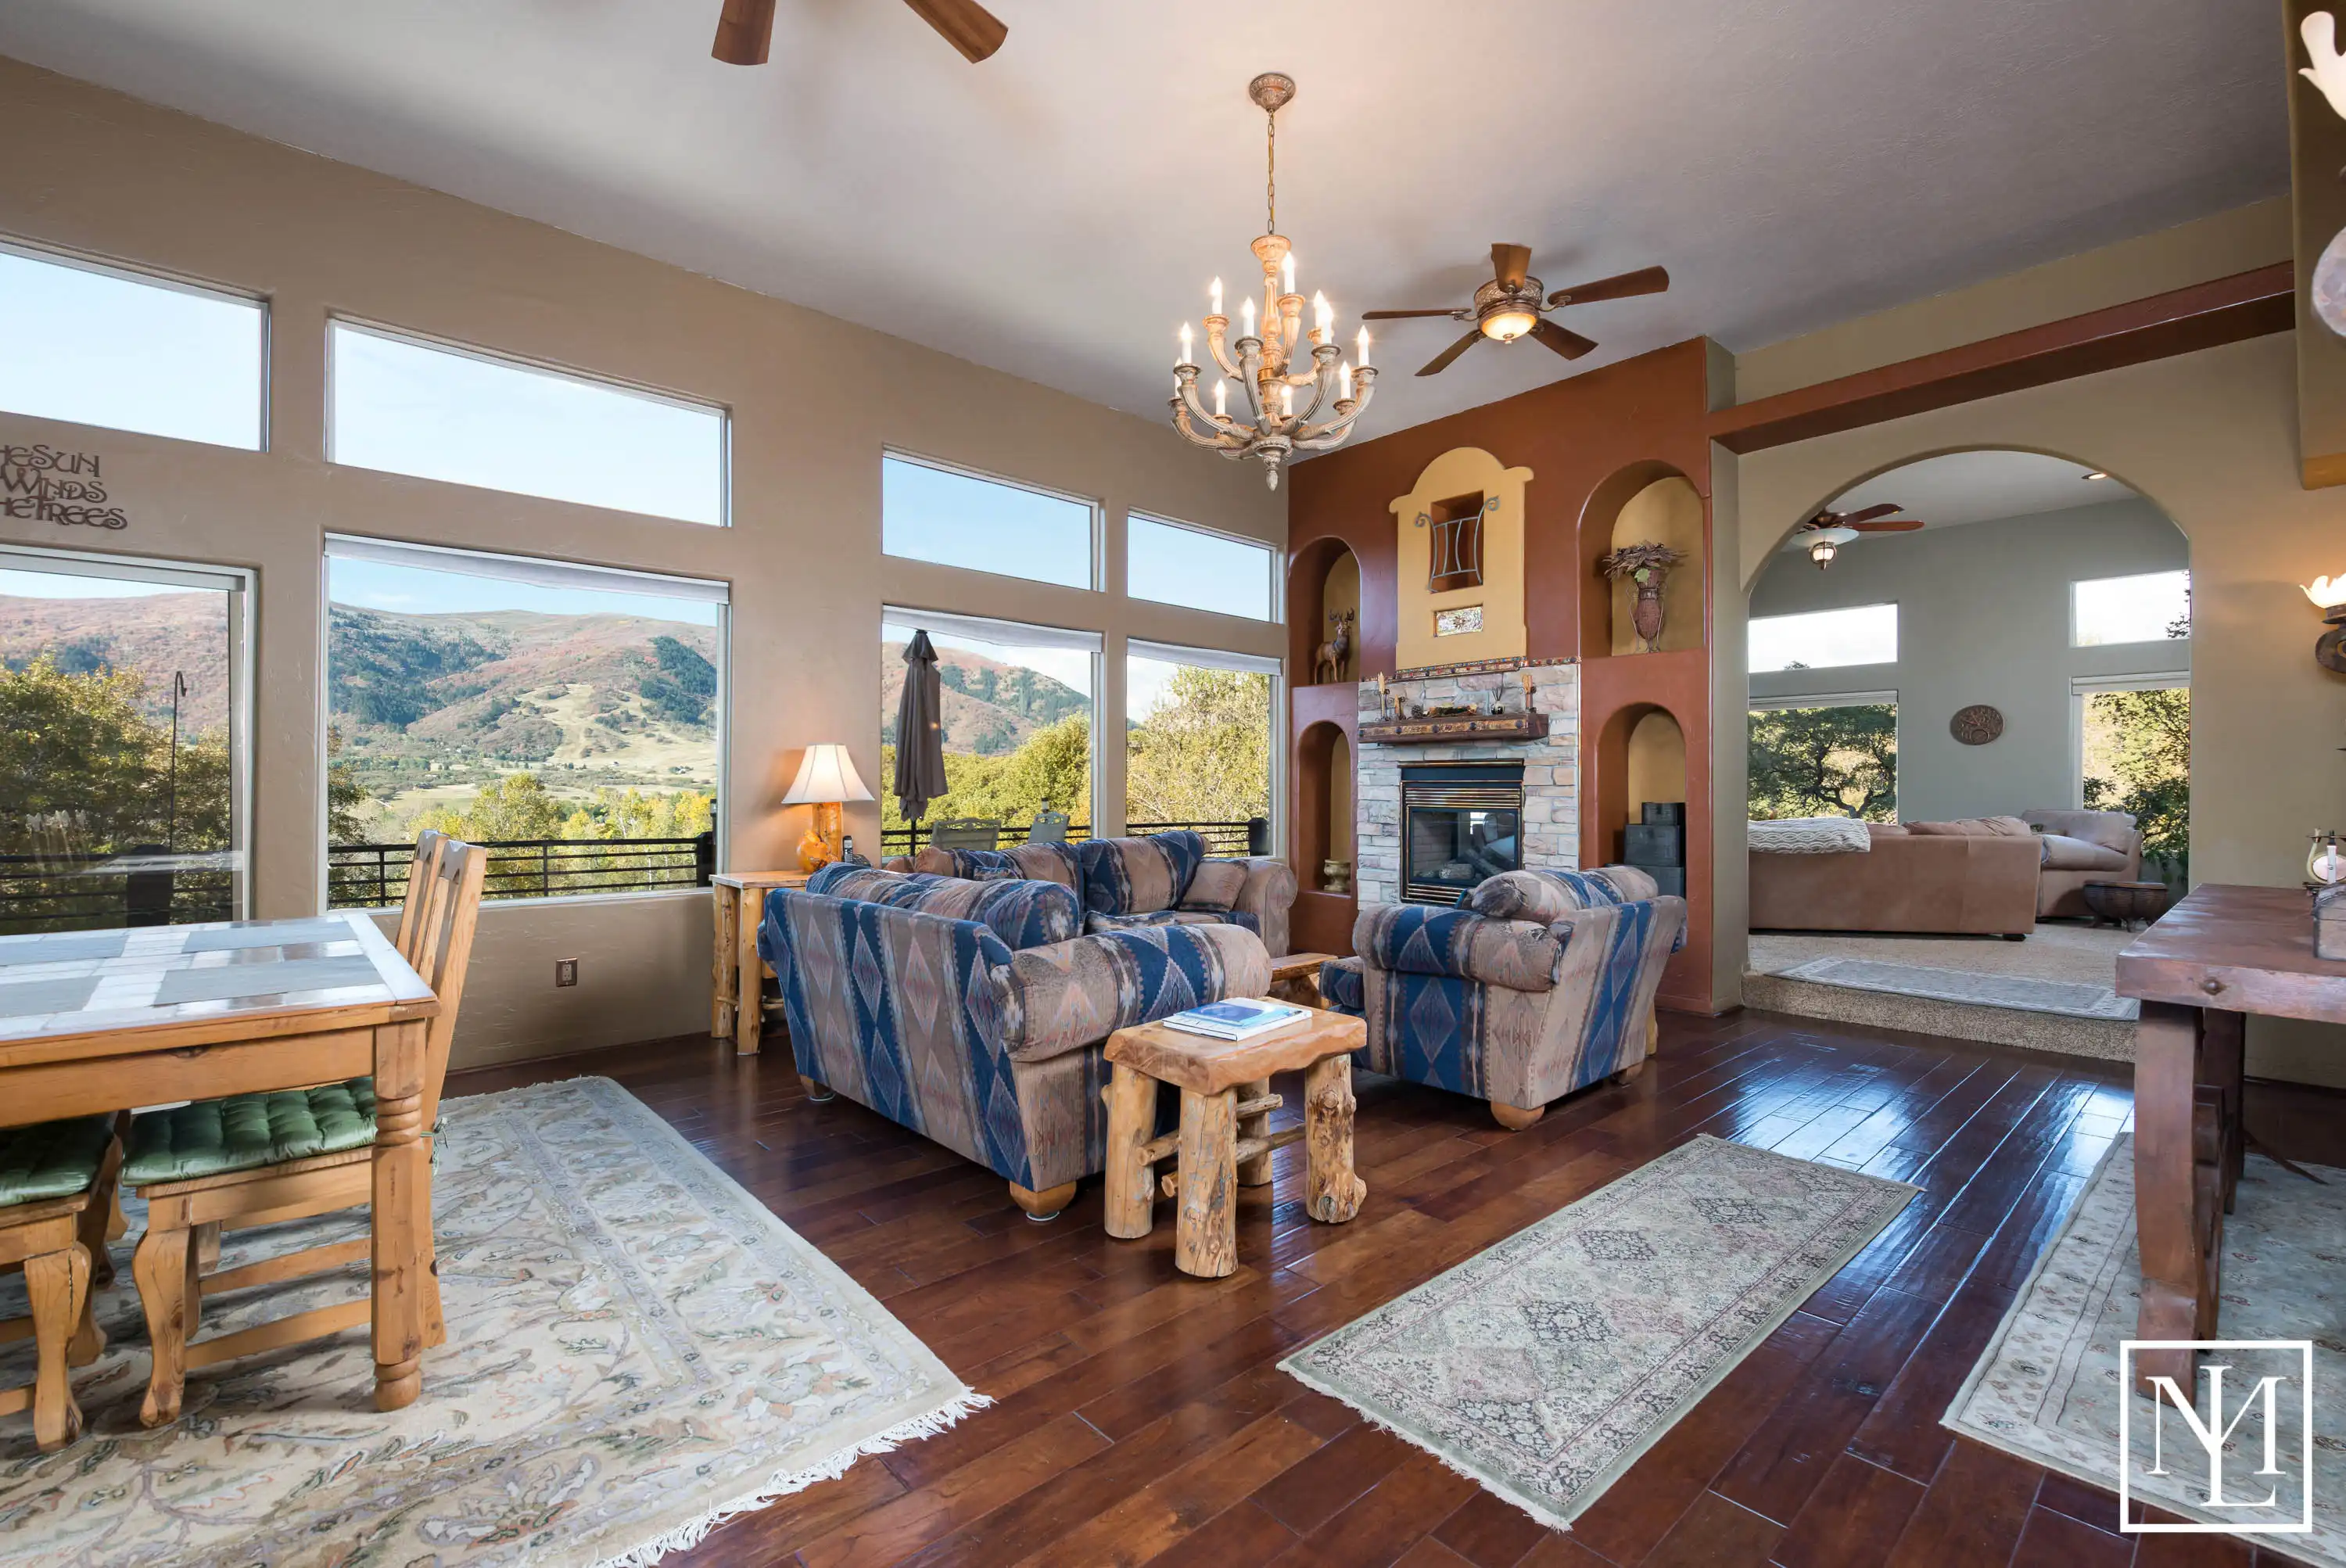 hero image for blog * SOLD * 3643 N 4700 E Eden, Custom Tuscan Luxury with Panoramic Views